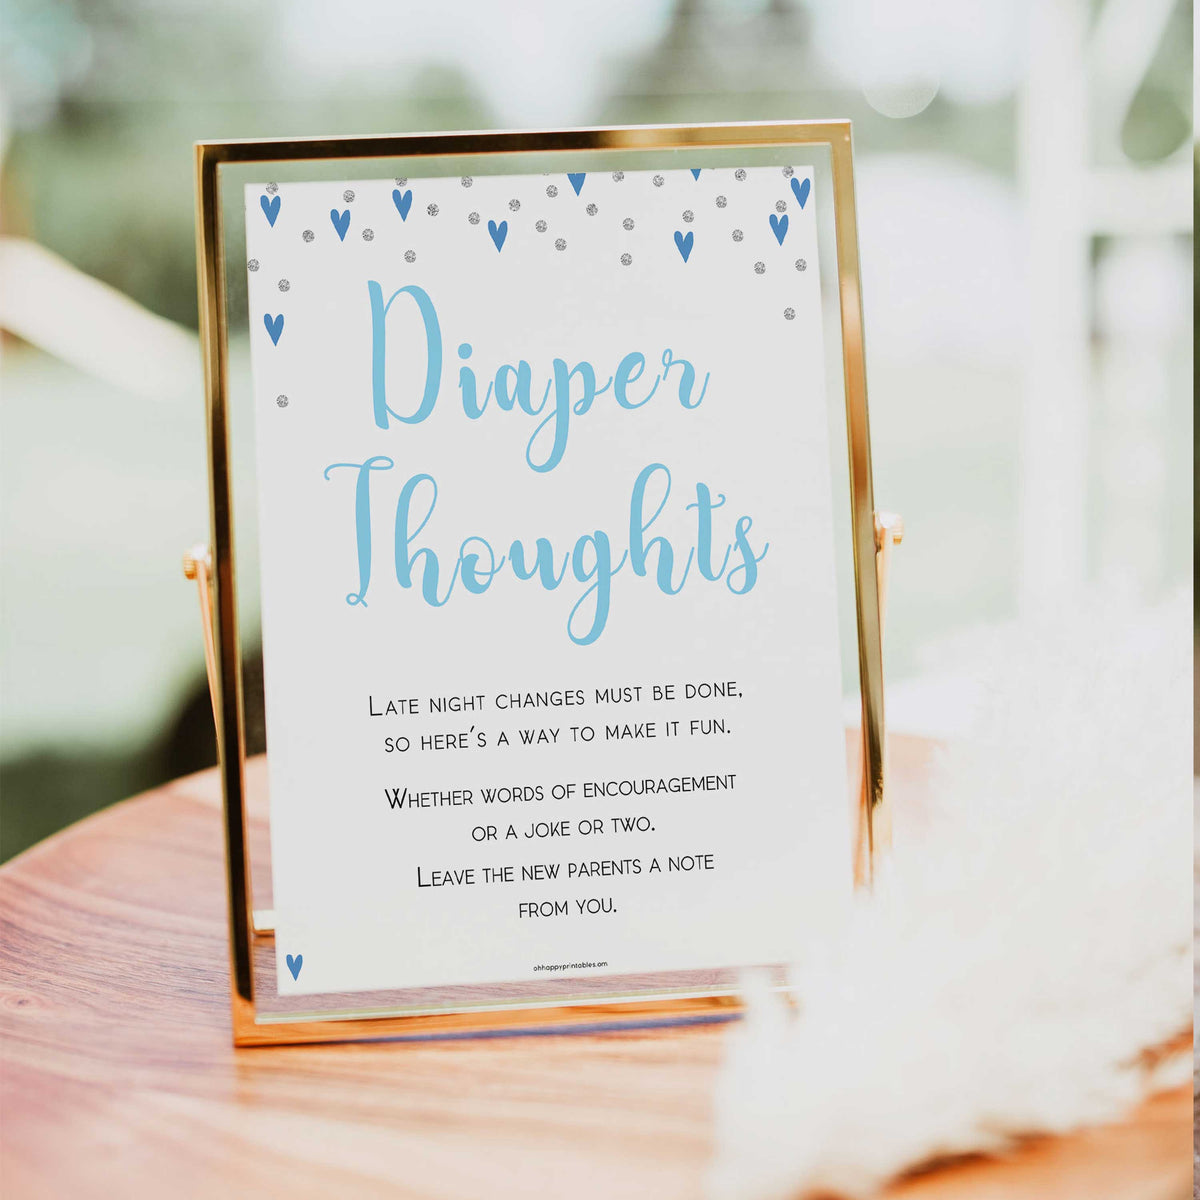 diaper thoughts game, late night diapers, Printable baby shower games, small blue hearts fun baby games, baby shower games, fun baby shower ideas, top baby shower ideas, silver baby shower, blue hearts baby shower ideas